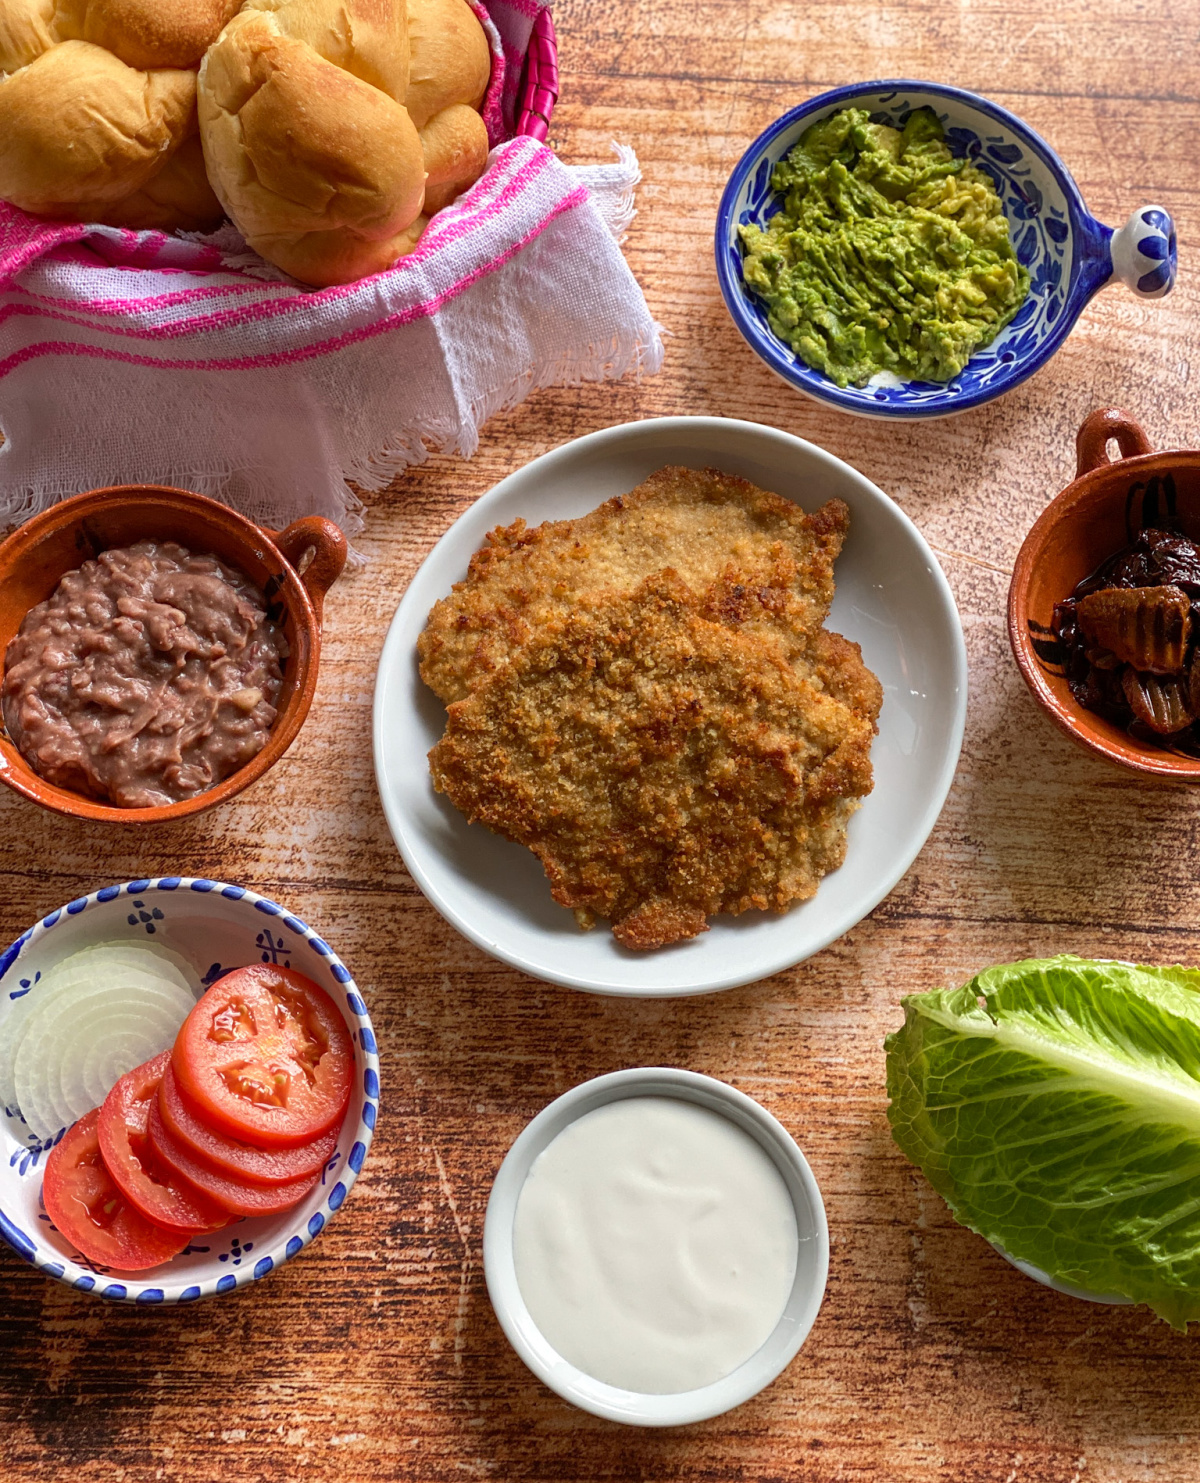 Components for the veal milanesa torta include breaded veal, refried beans, tomato, onion, lettuce and more